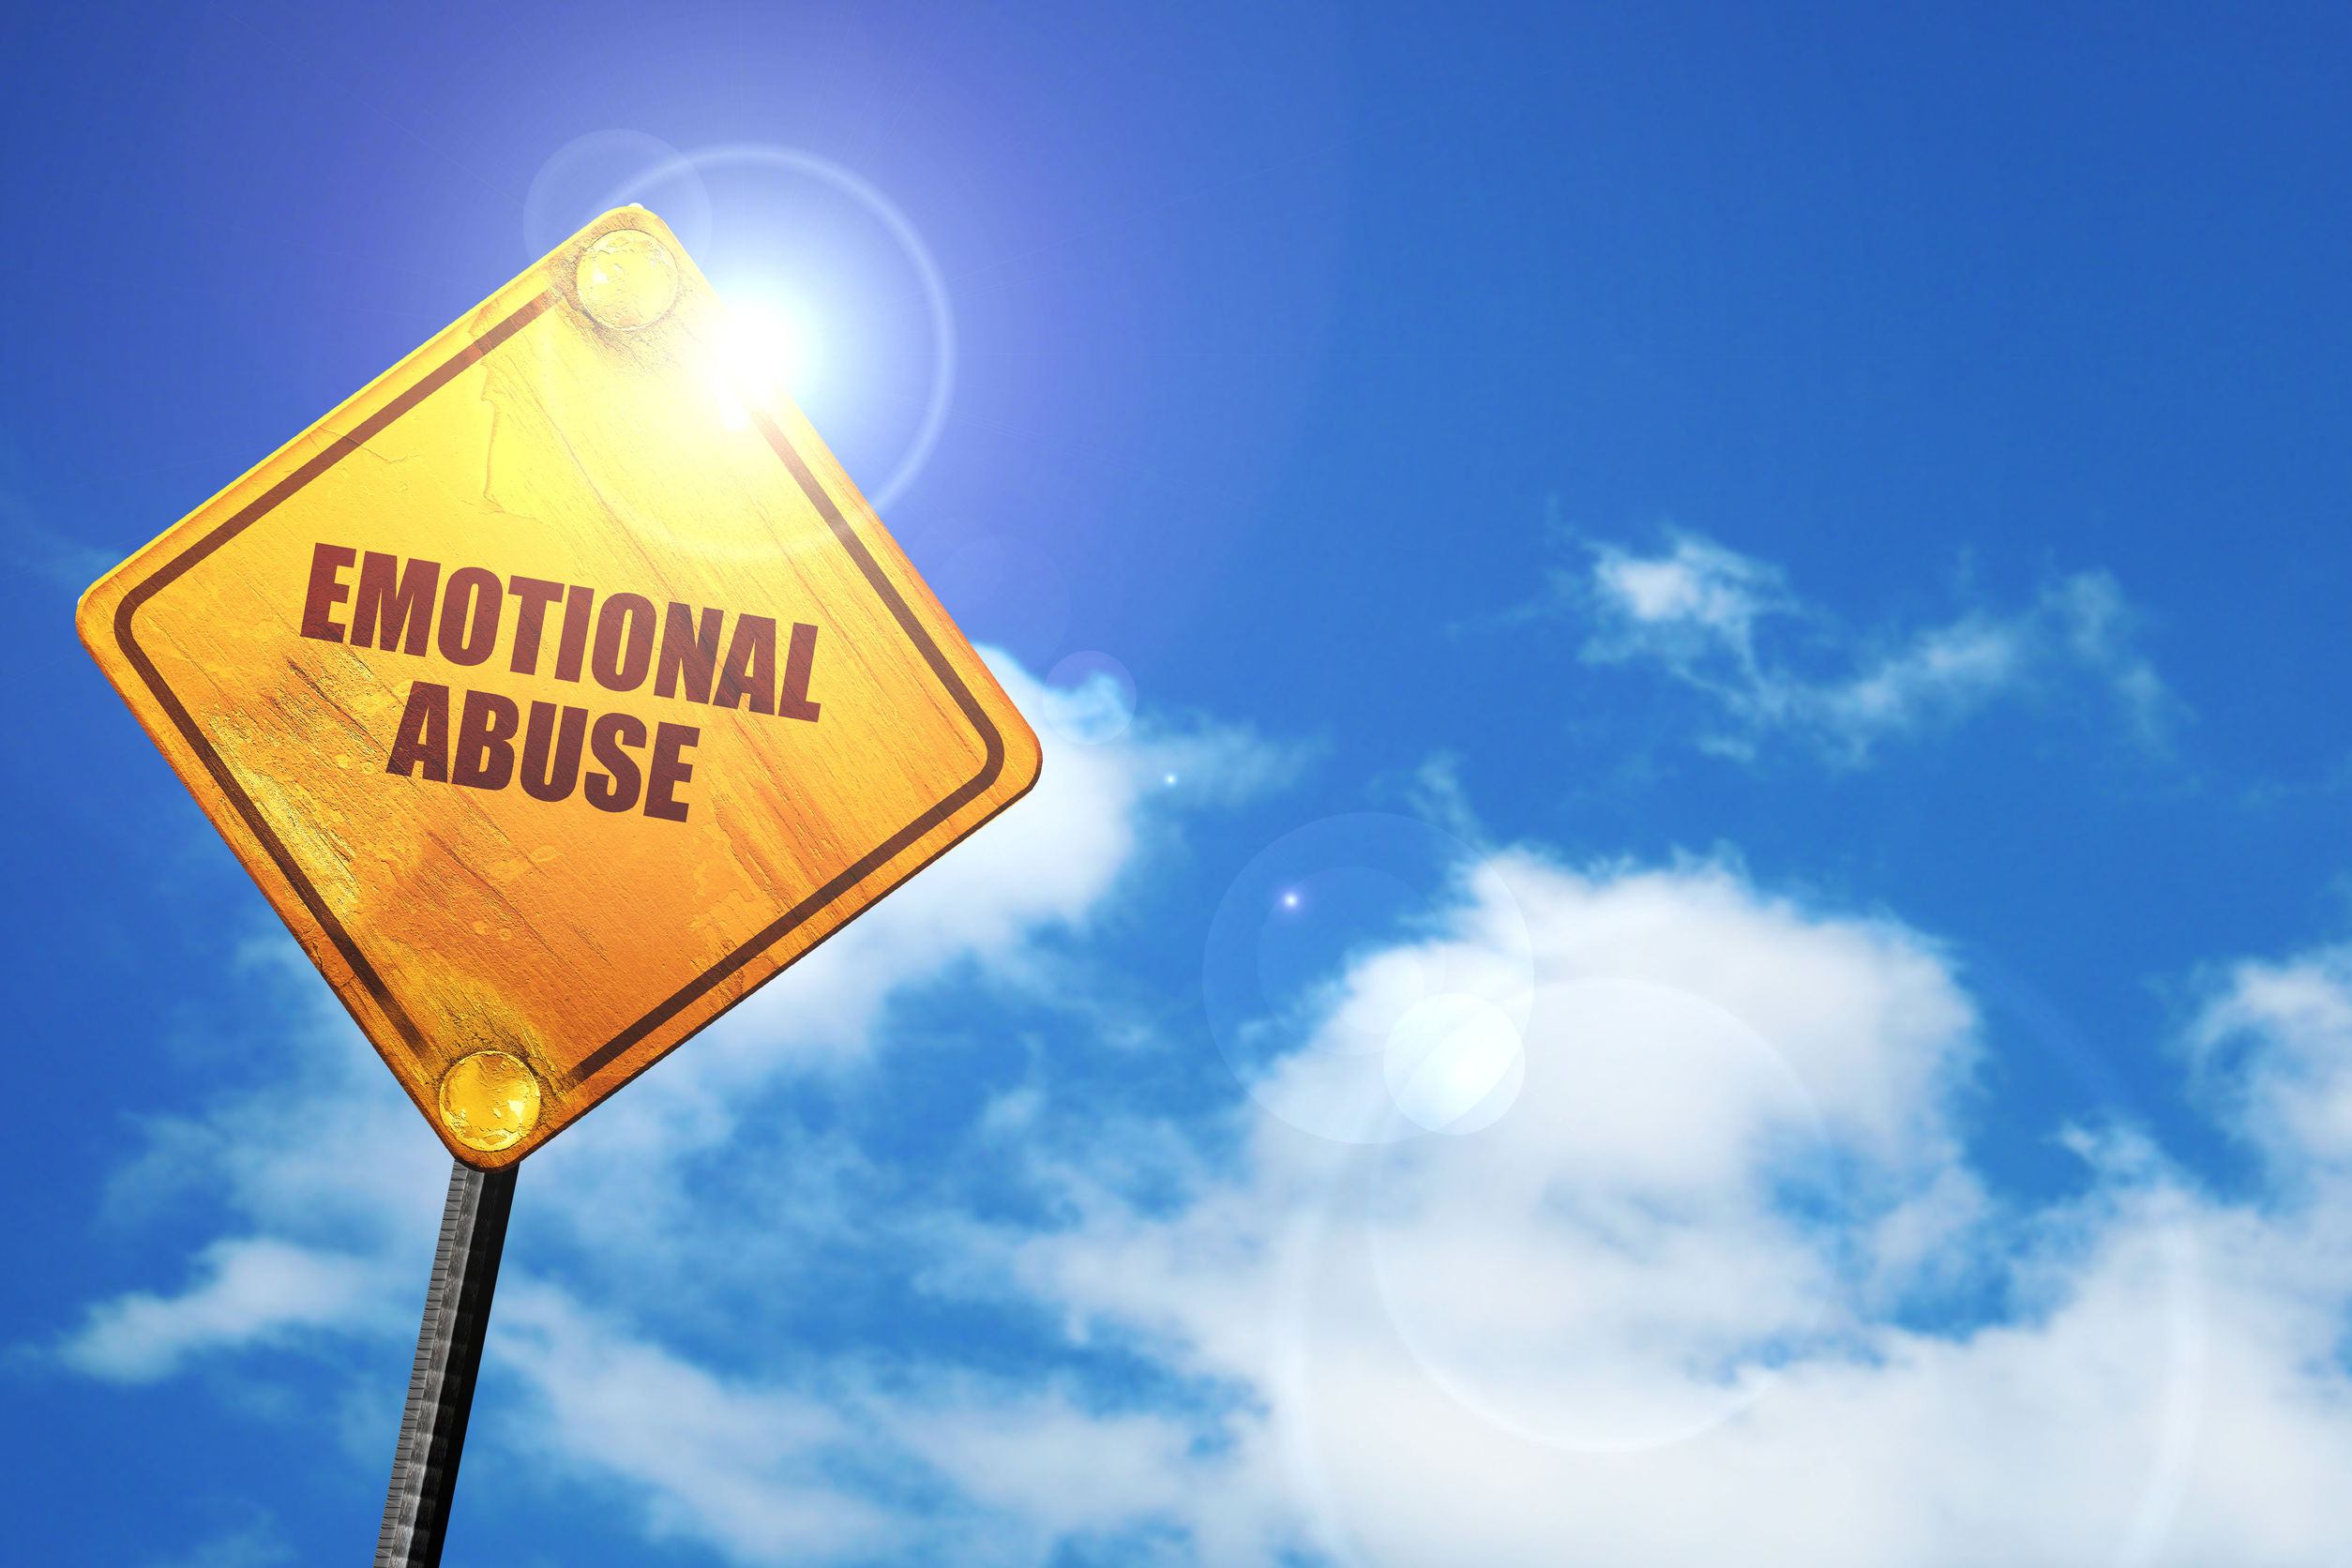 therapy for victims of emotional abuse